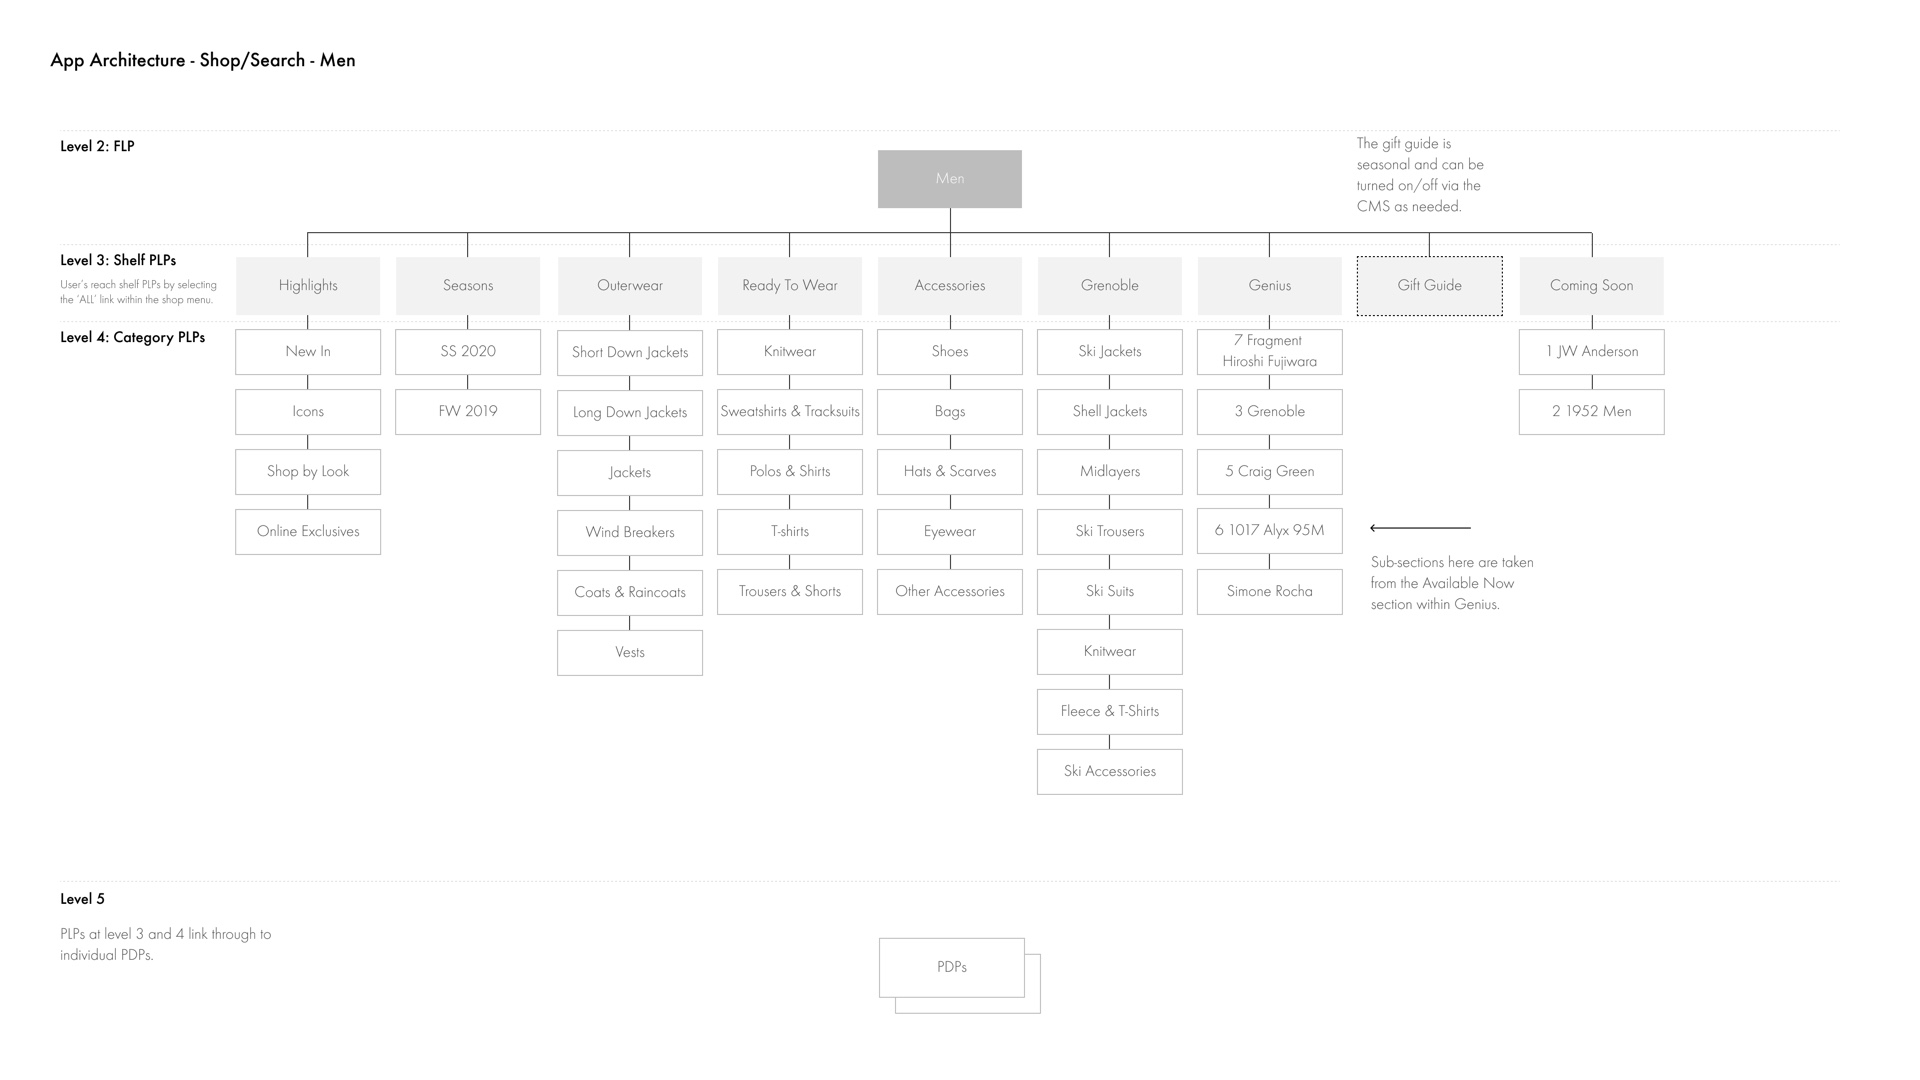 Sitemap showing the information hierarchy within the men's sub-section of the app